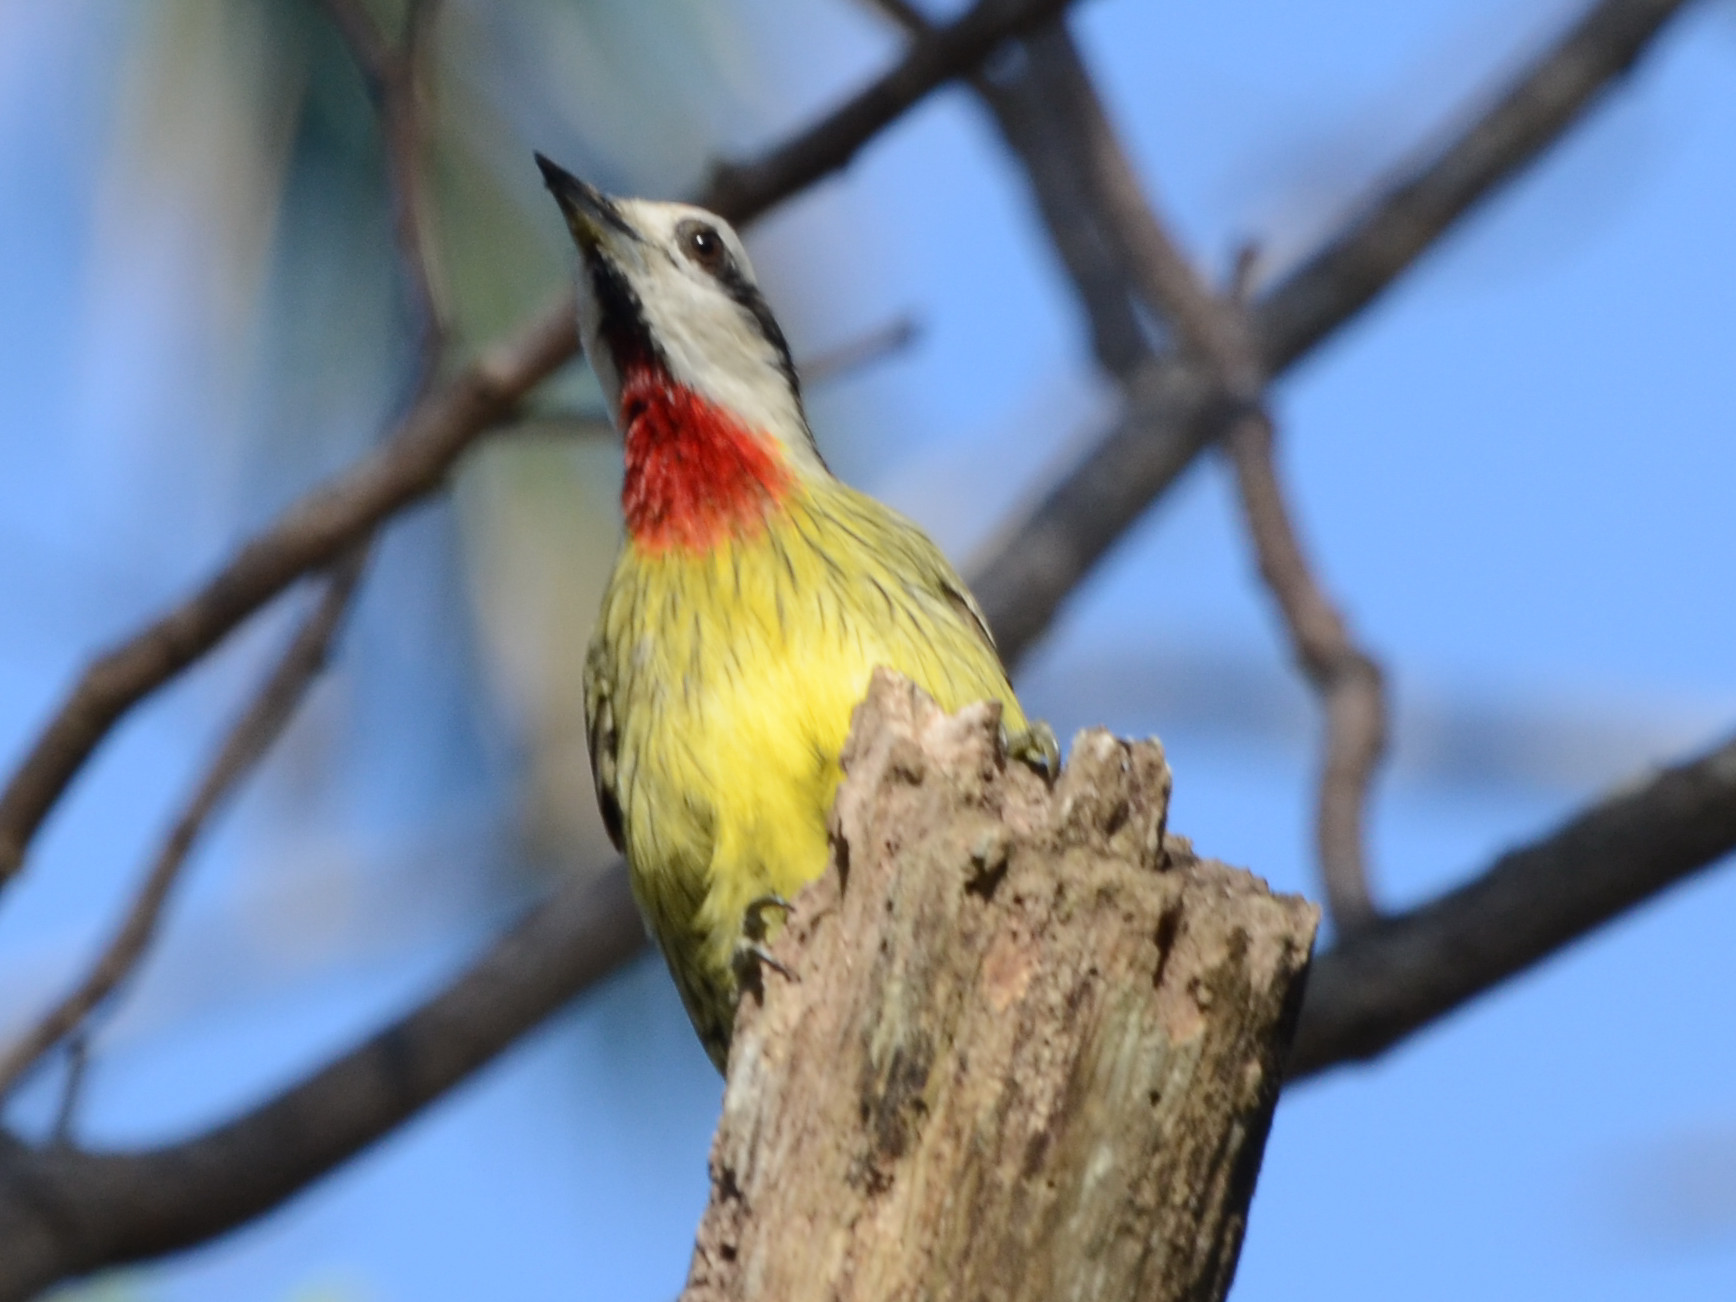 Click picture to see more Cuban Green Woodpeckers.